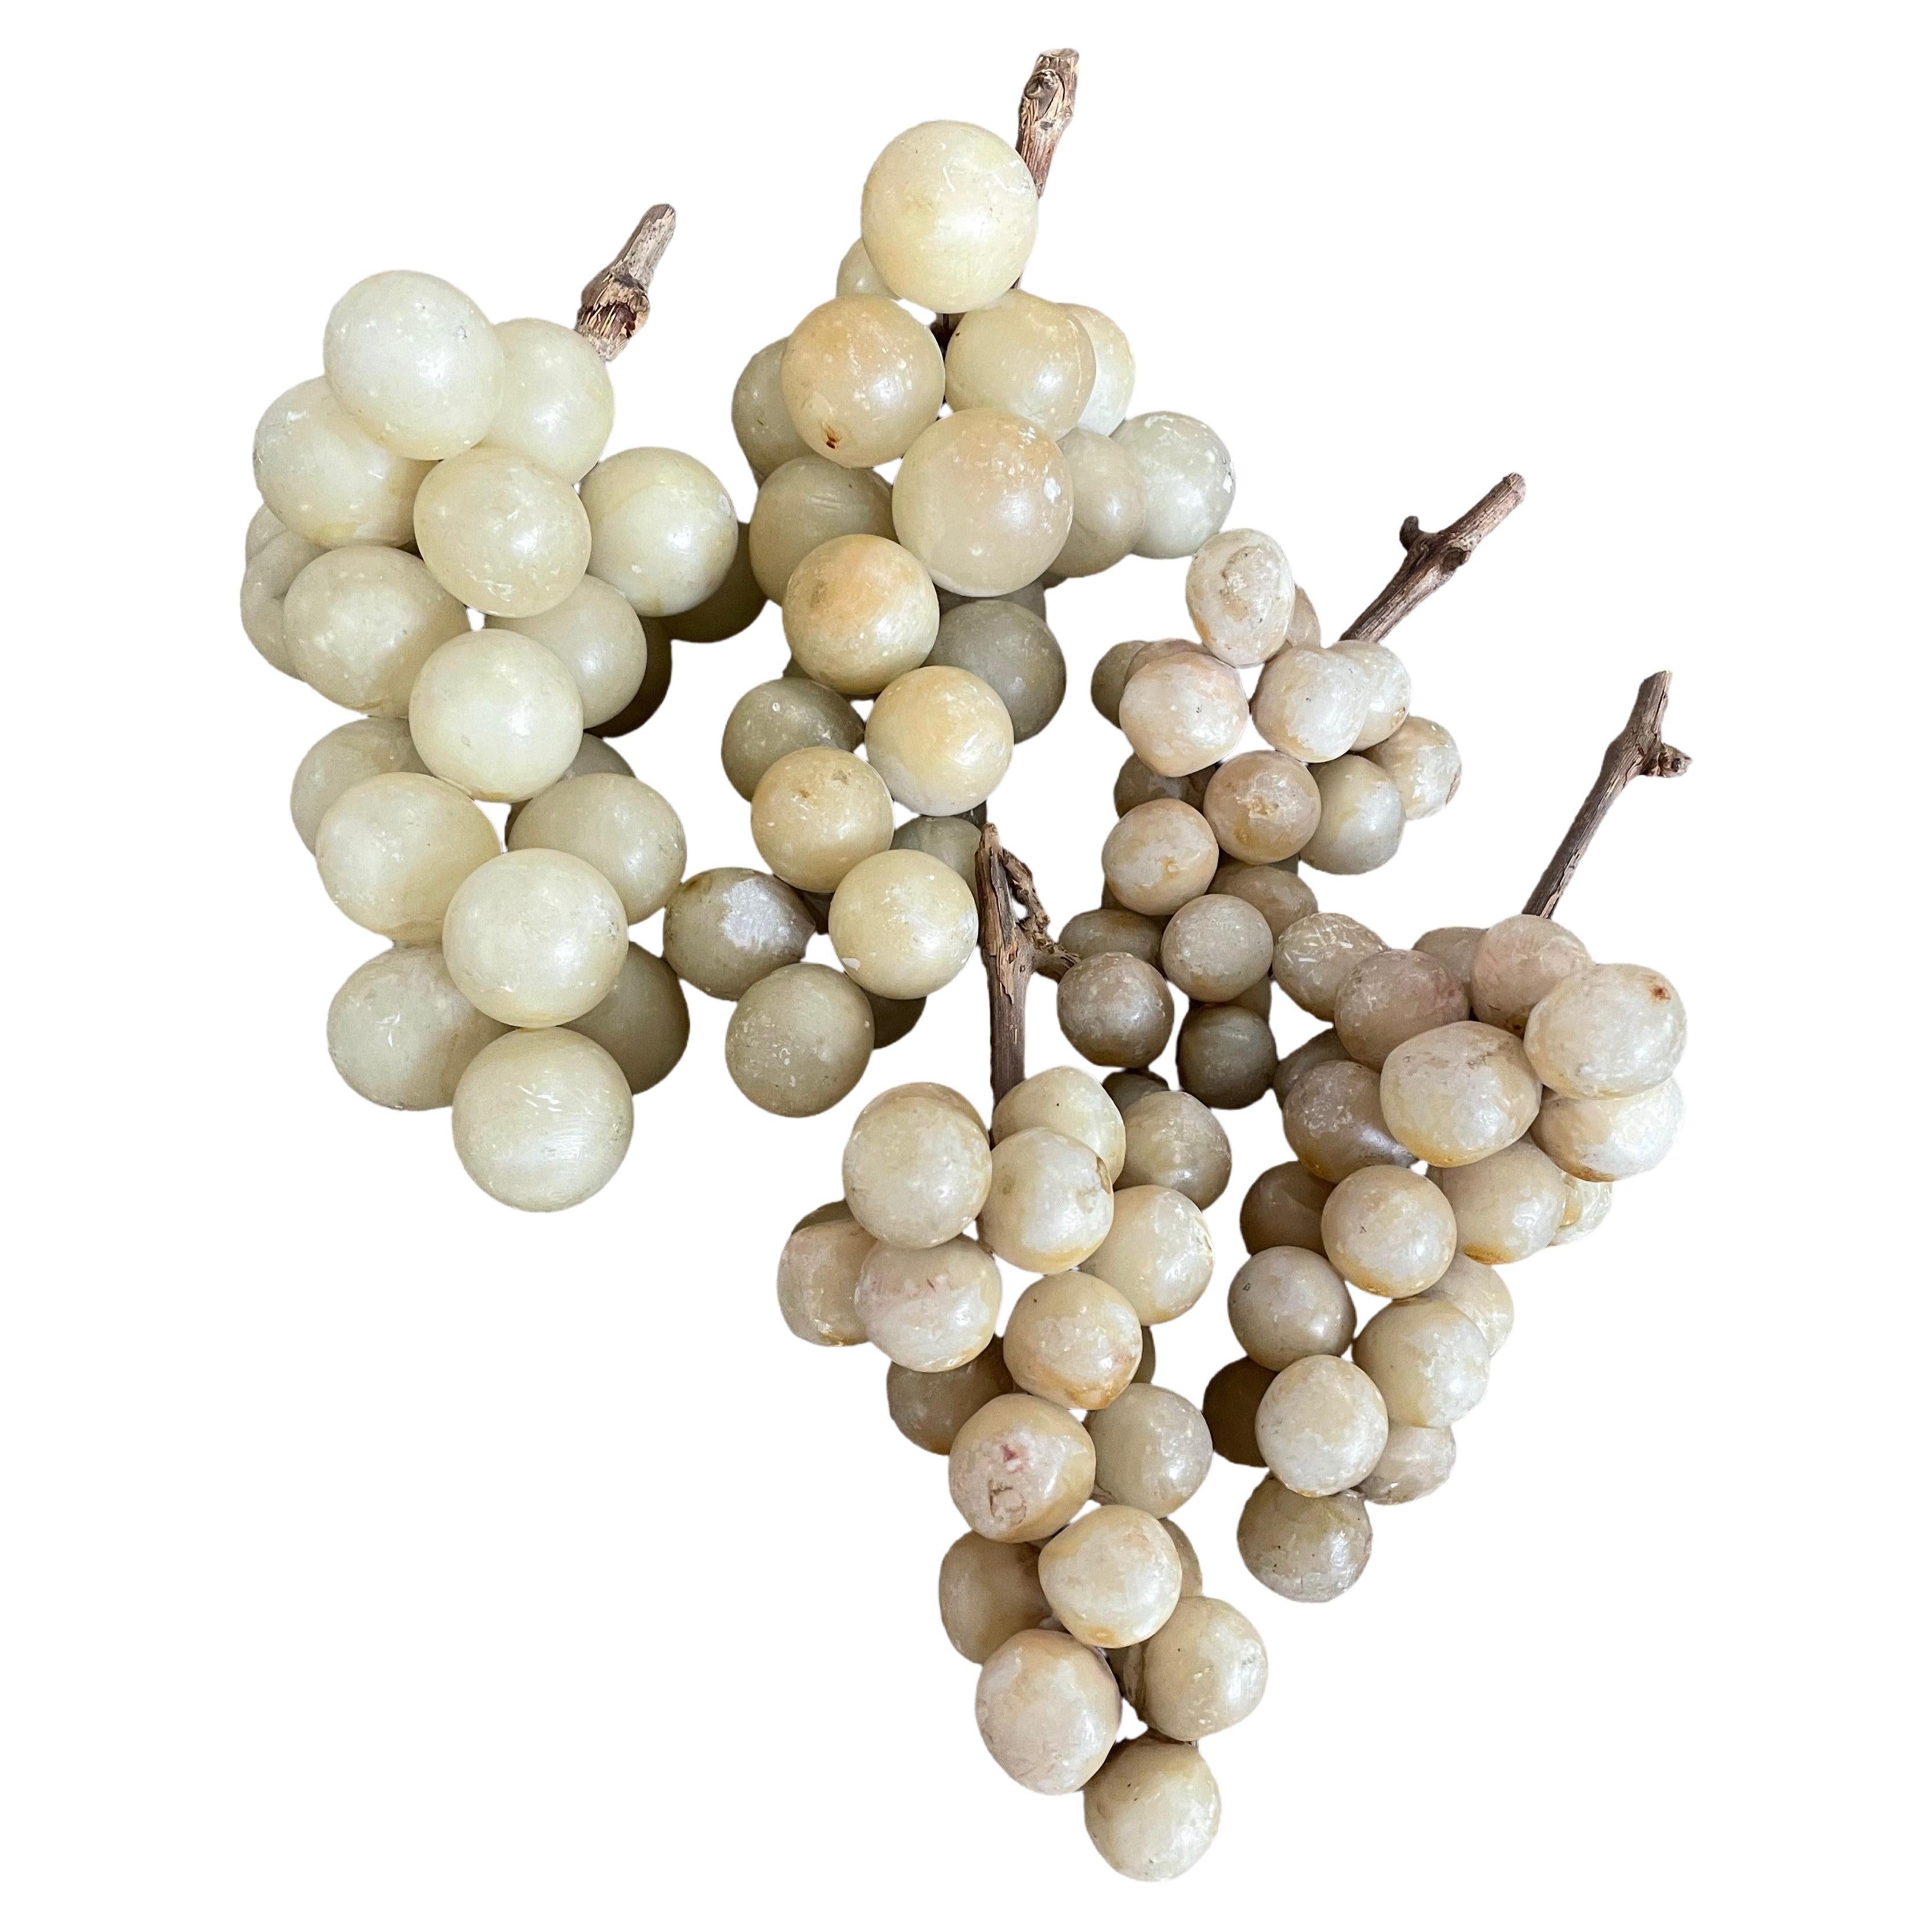 Set of Five Vintage Italian Alabaster Grape Clusters with Wood Stems